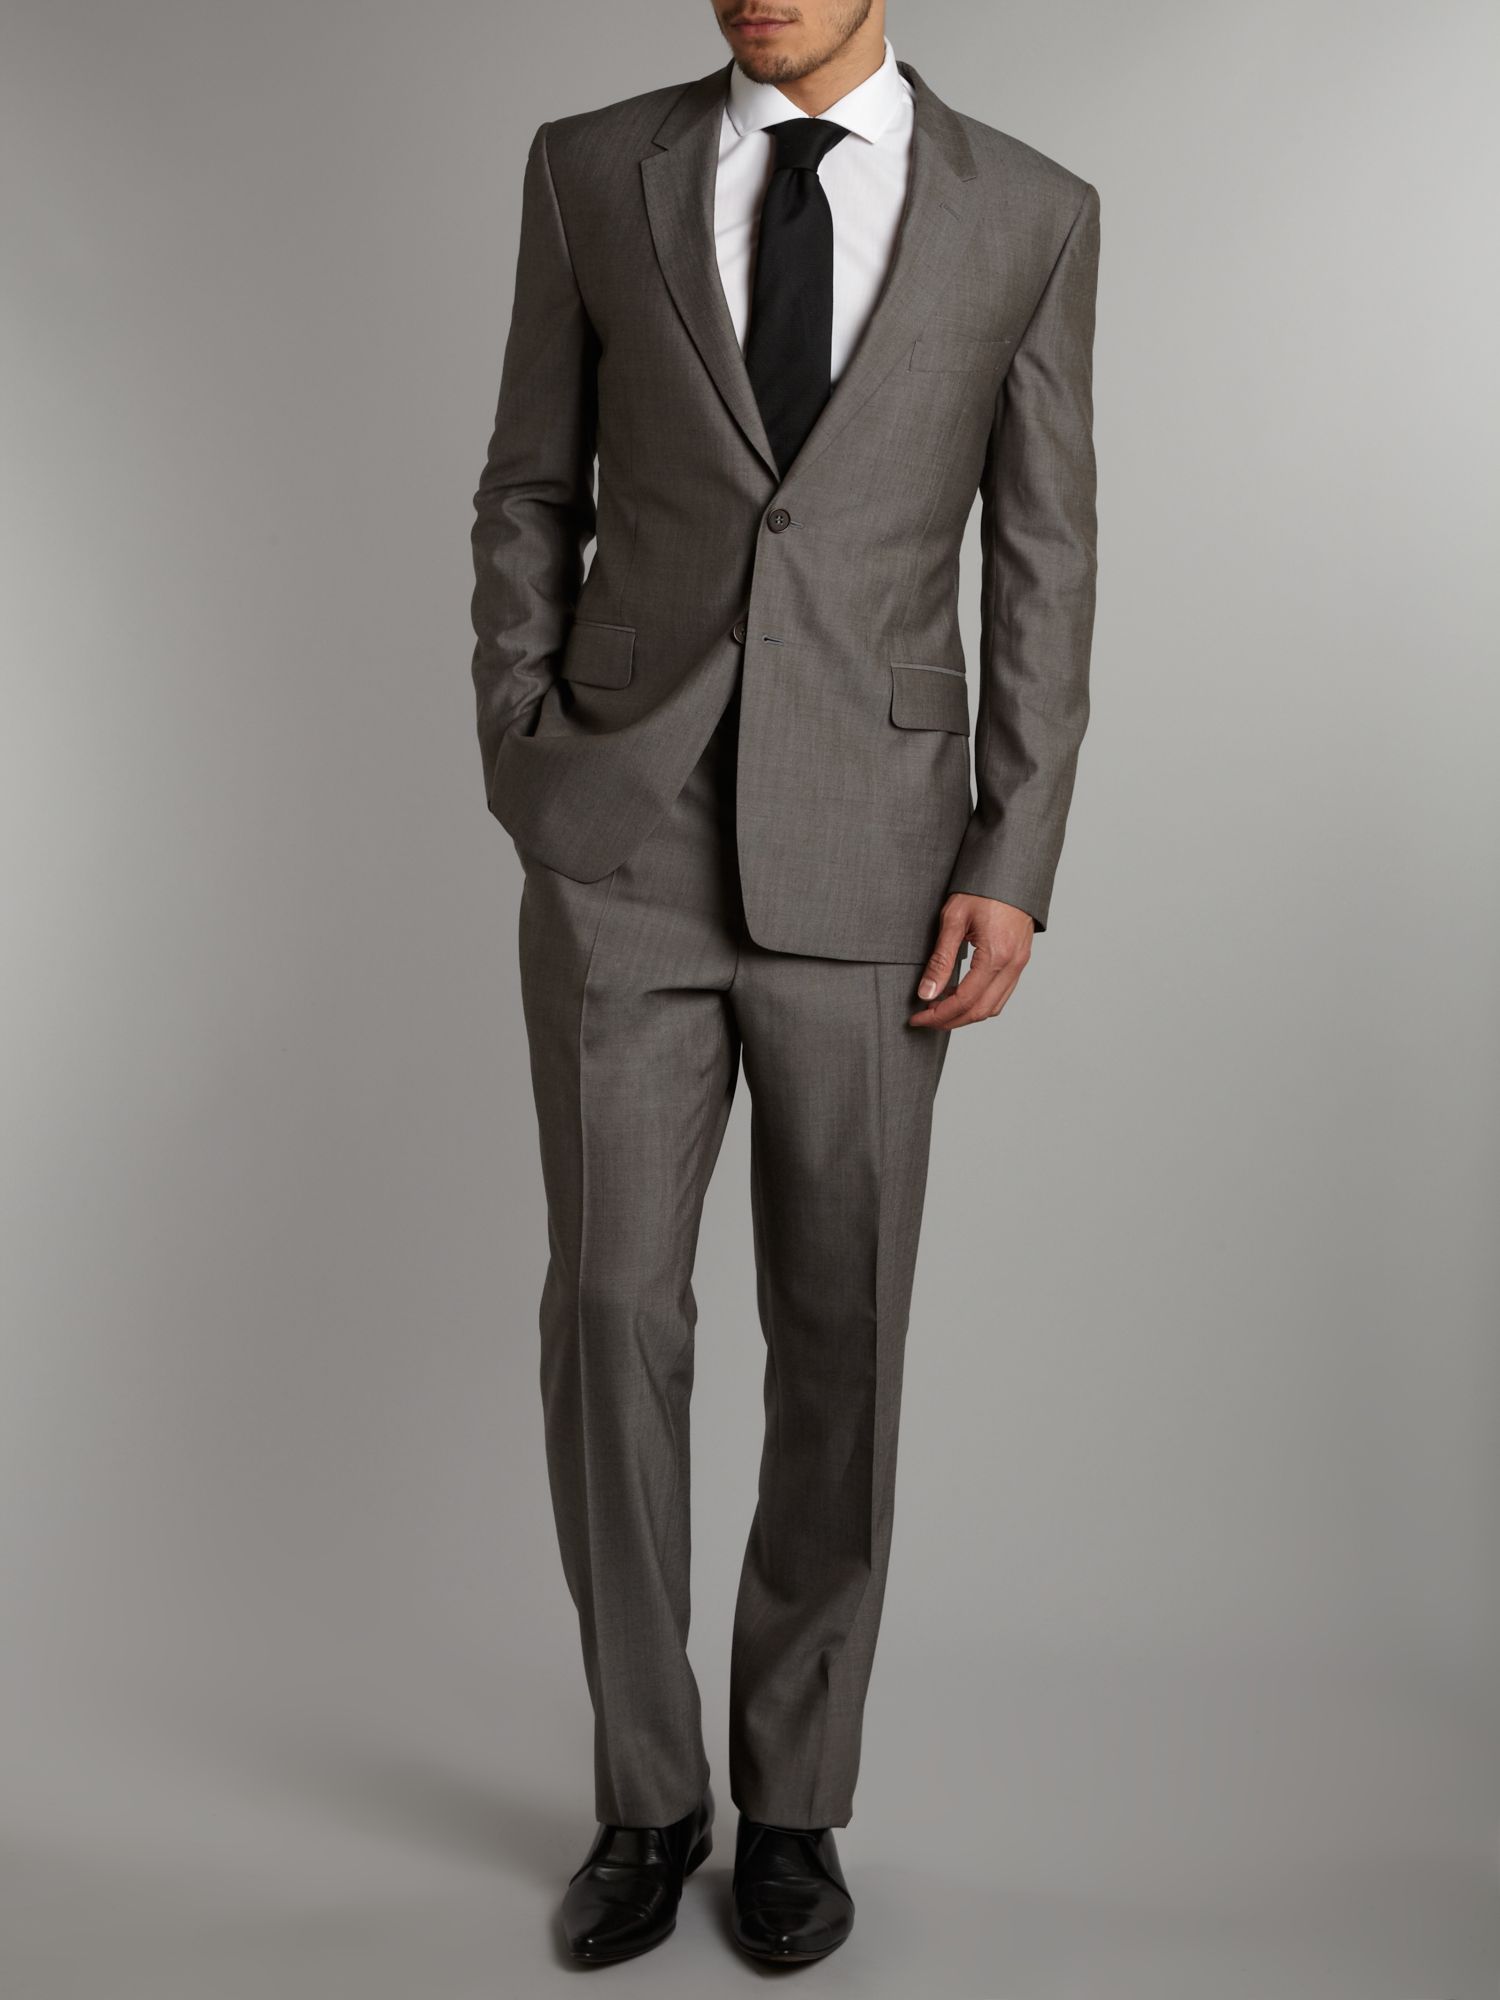 Paul Smith Floral Pewter Wool Suit in Gray for Men (Grey) | Lyst